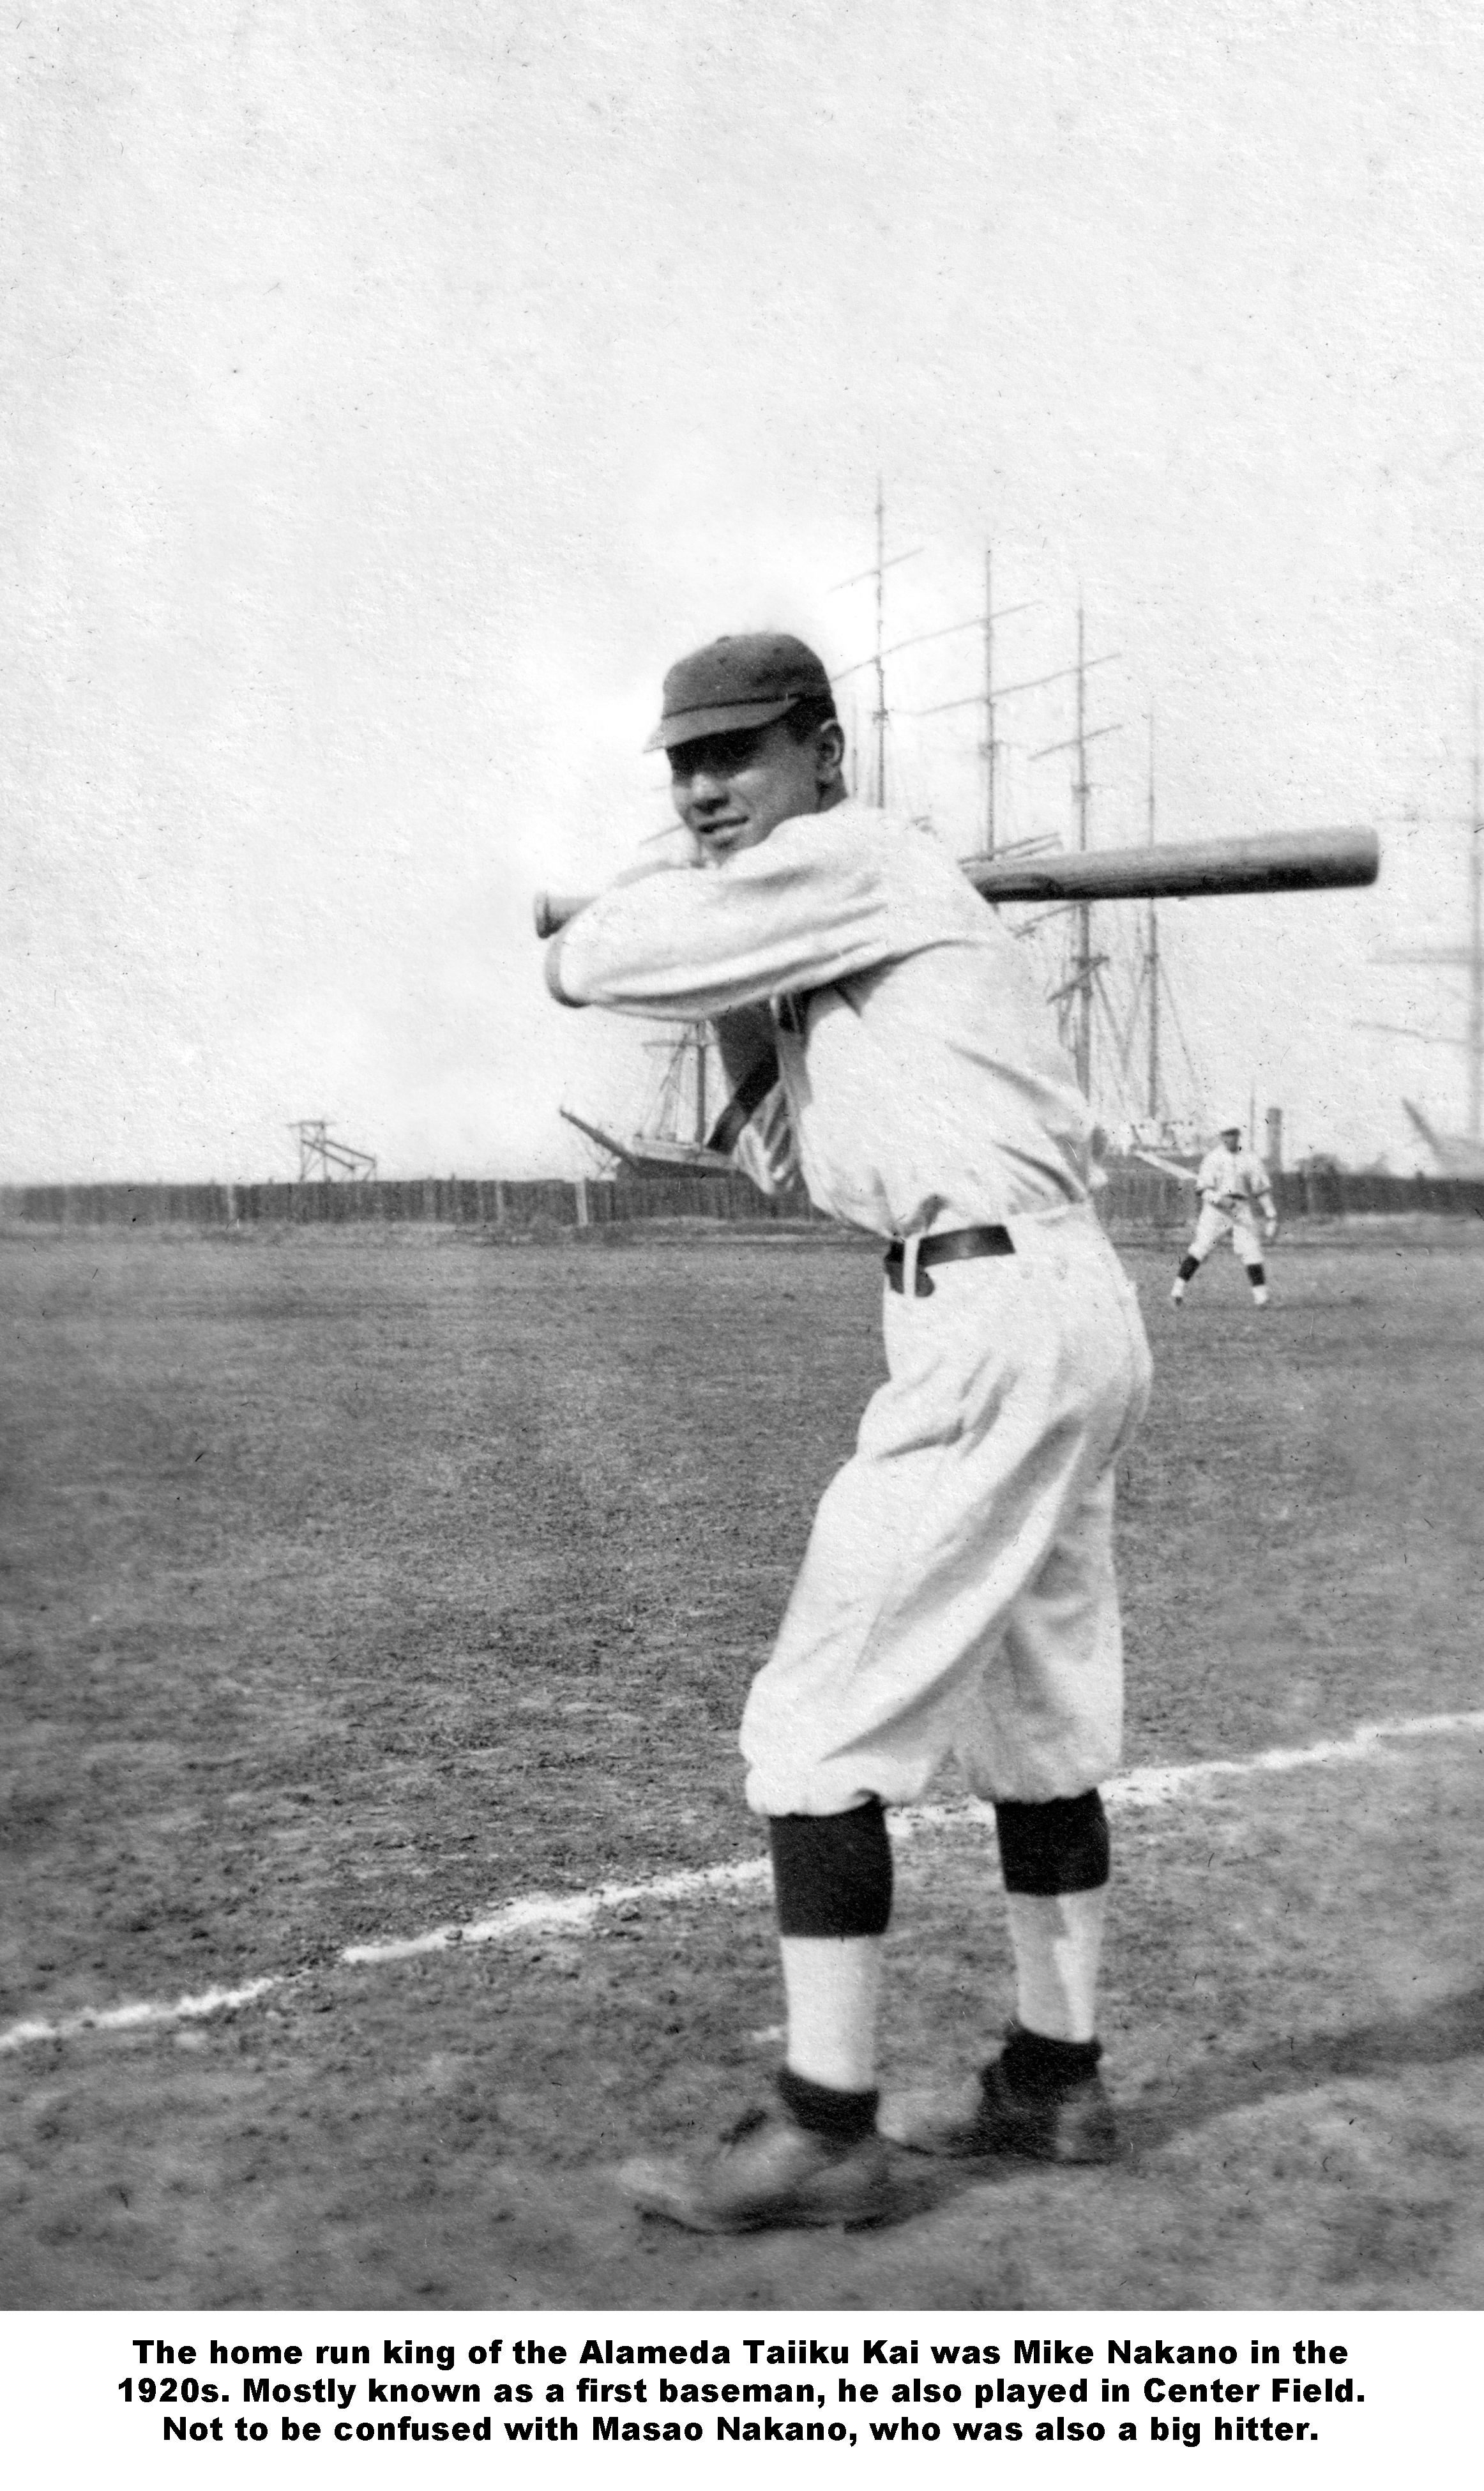 ddr-ajah-5-58 — Man in baseball uniform with bat and ships in the  background